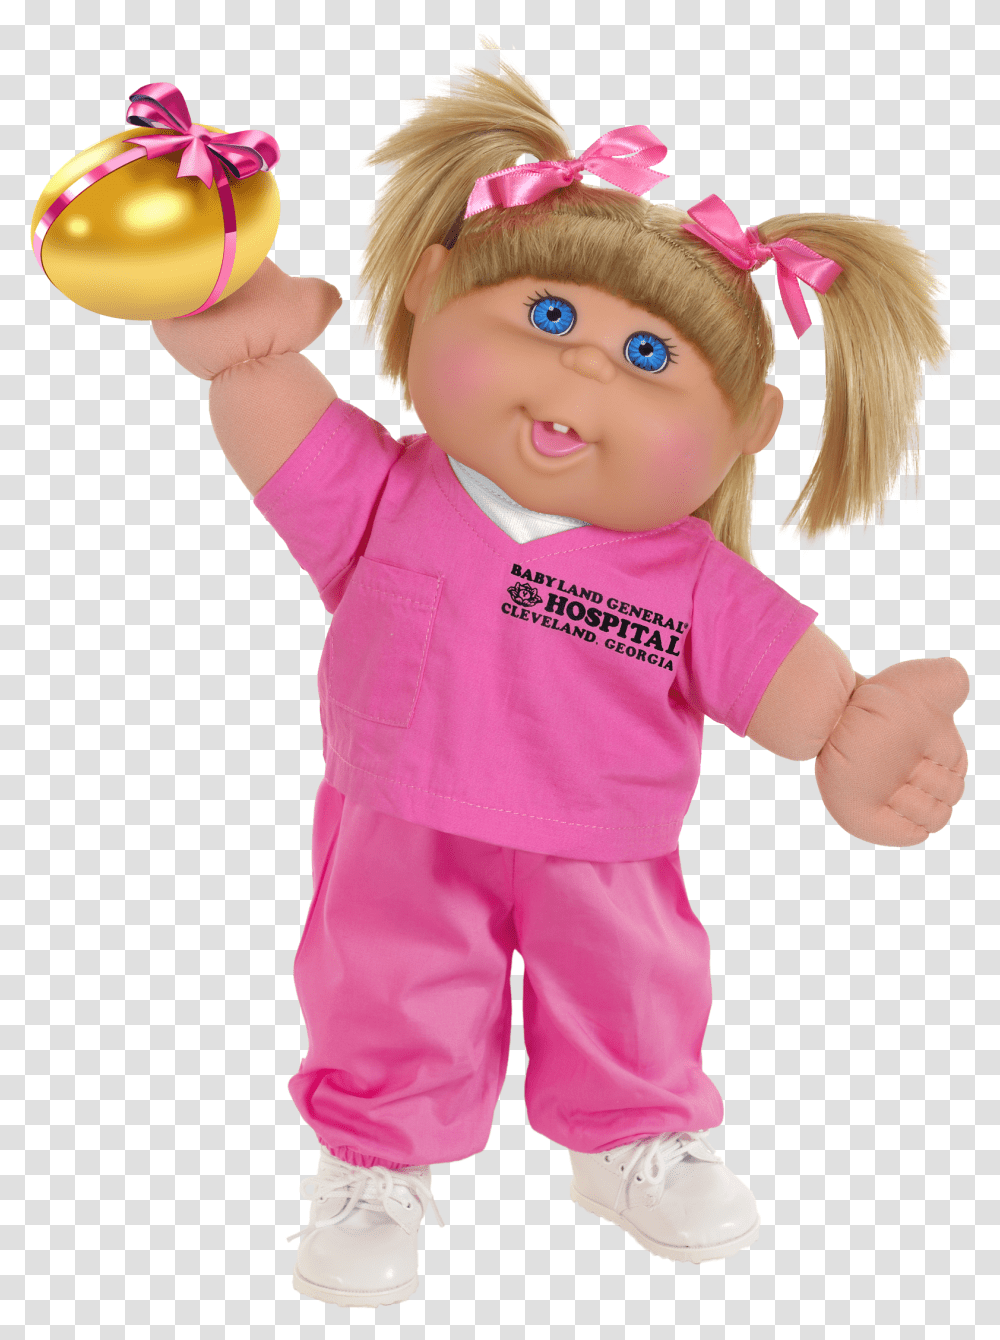 Find The Golden Egg At The Cabbage Patch Kids Magical Cabbage Patch Kids, Doll, Toy, Person, Human Transparent Png